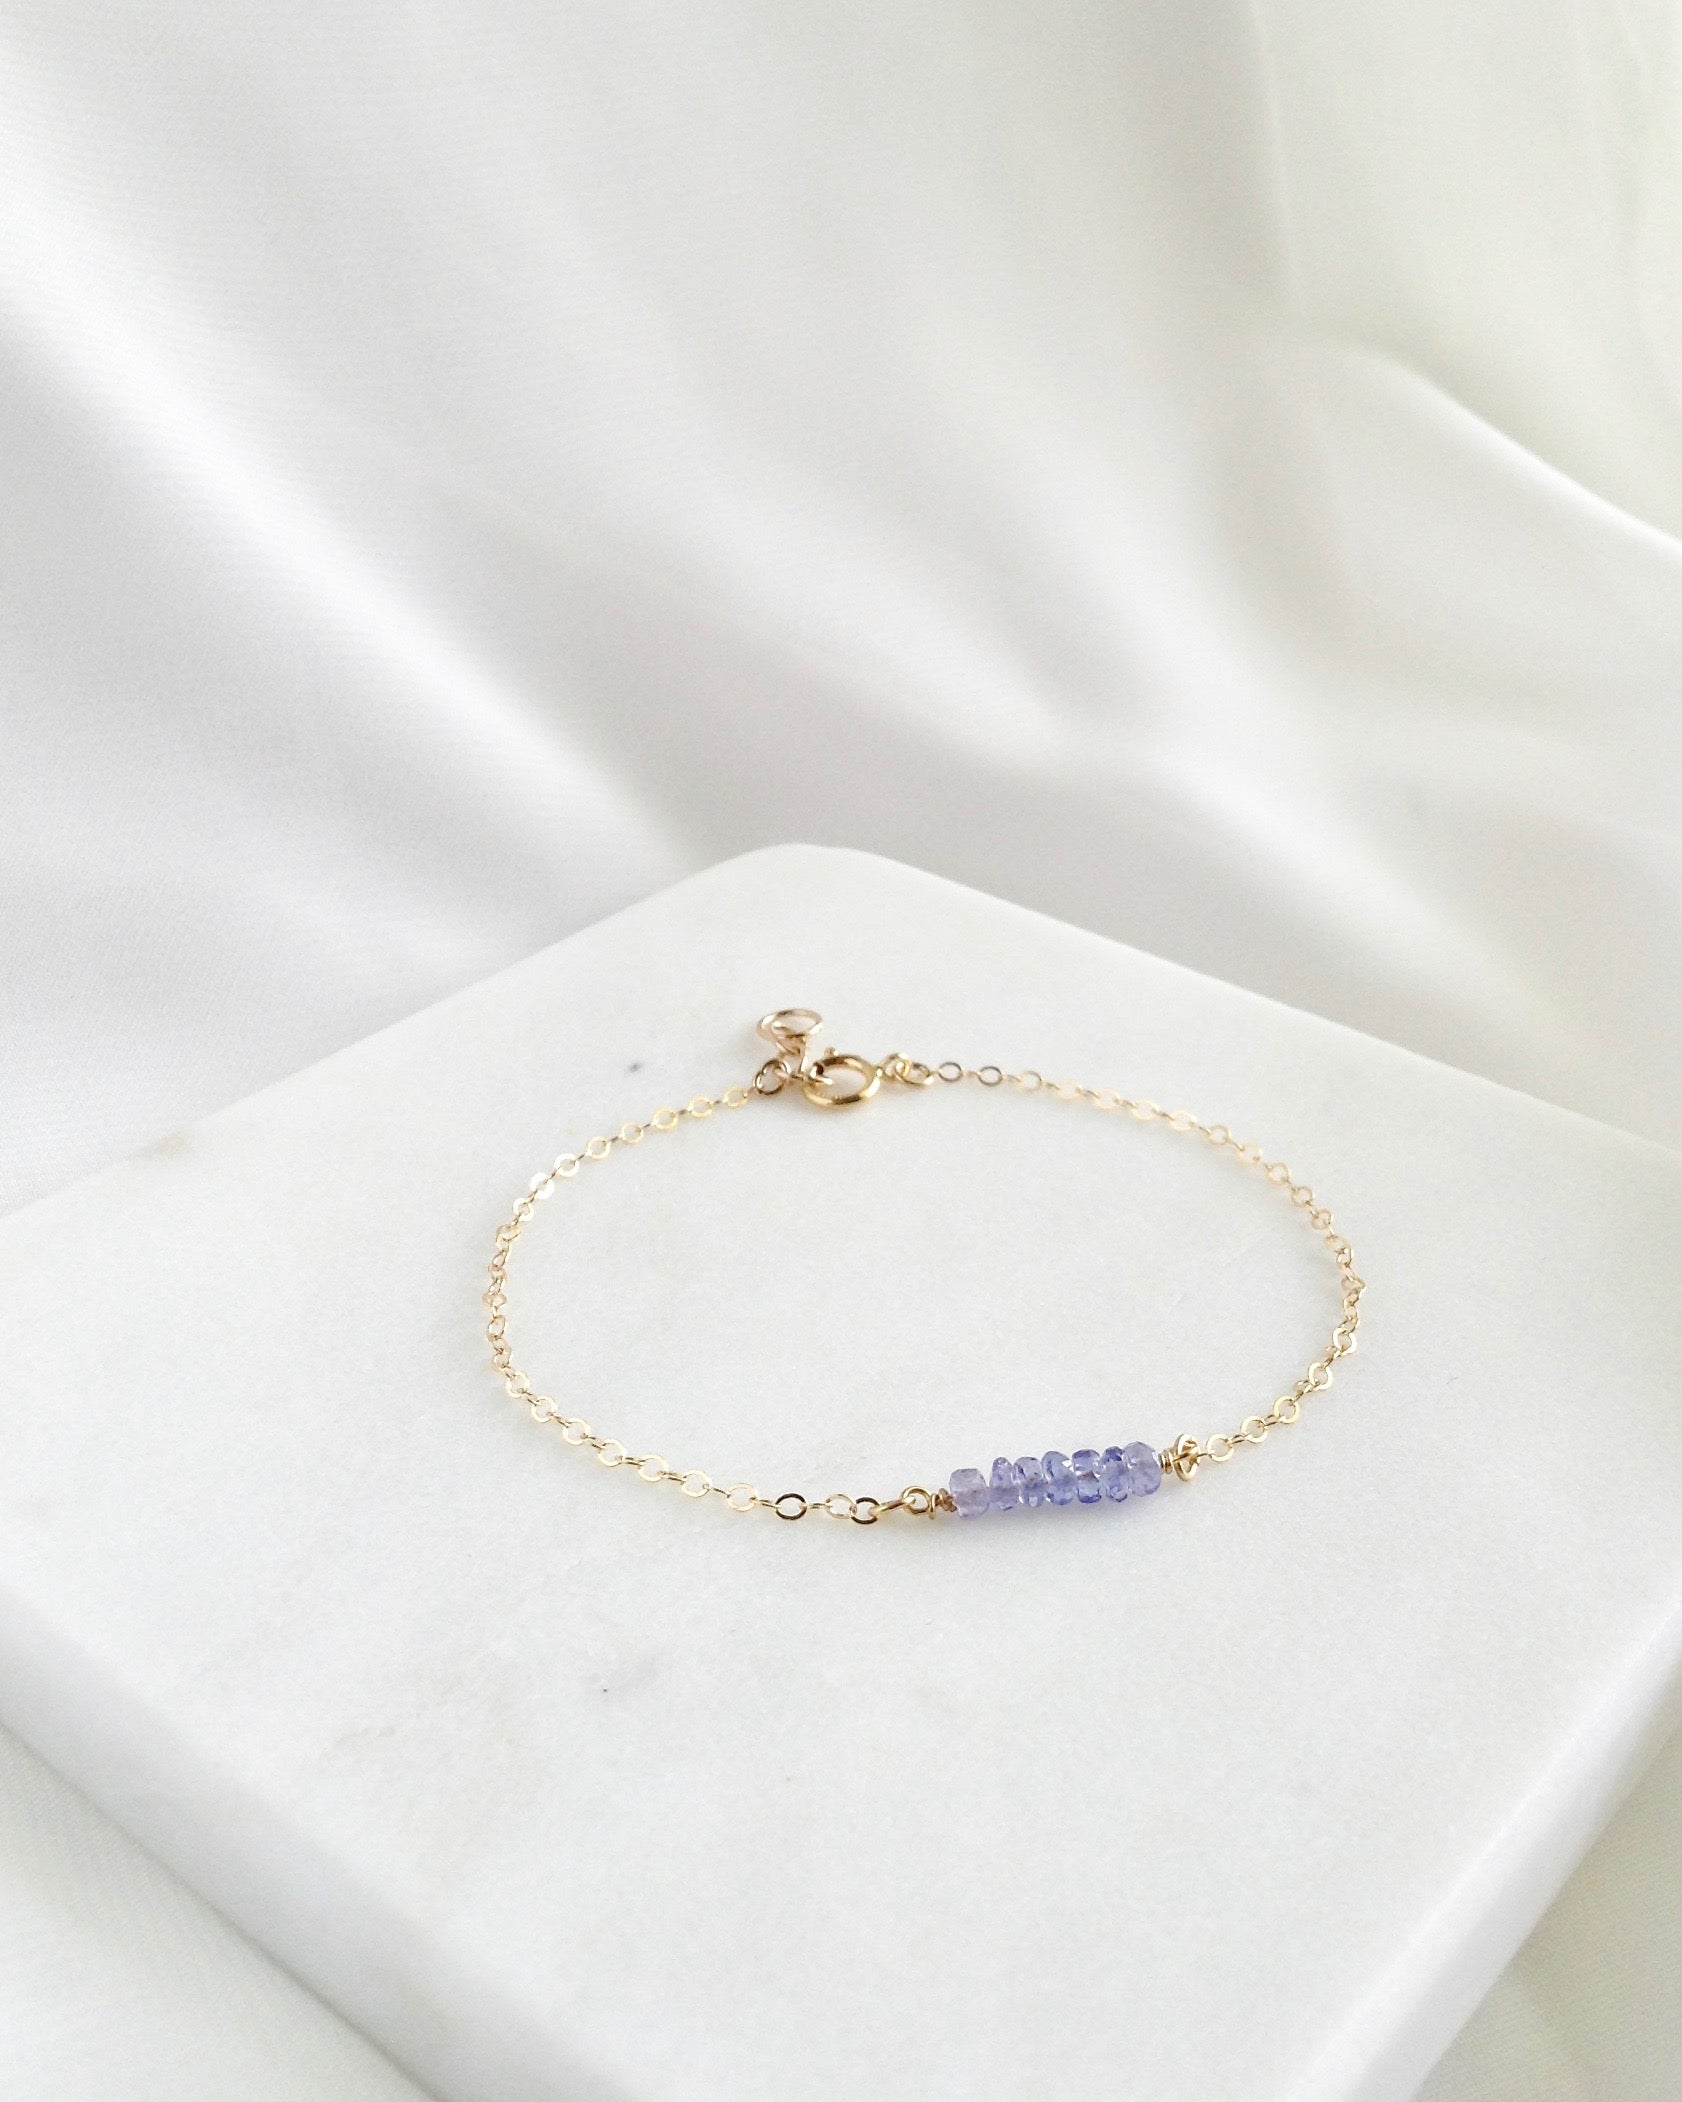 Simple Tanzanite Bracelet In Gold Filled or Sterling Silver | IB Jewelry